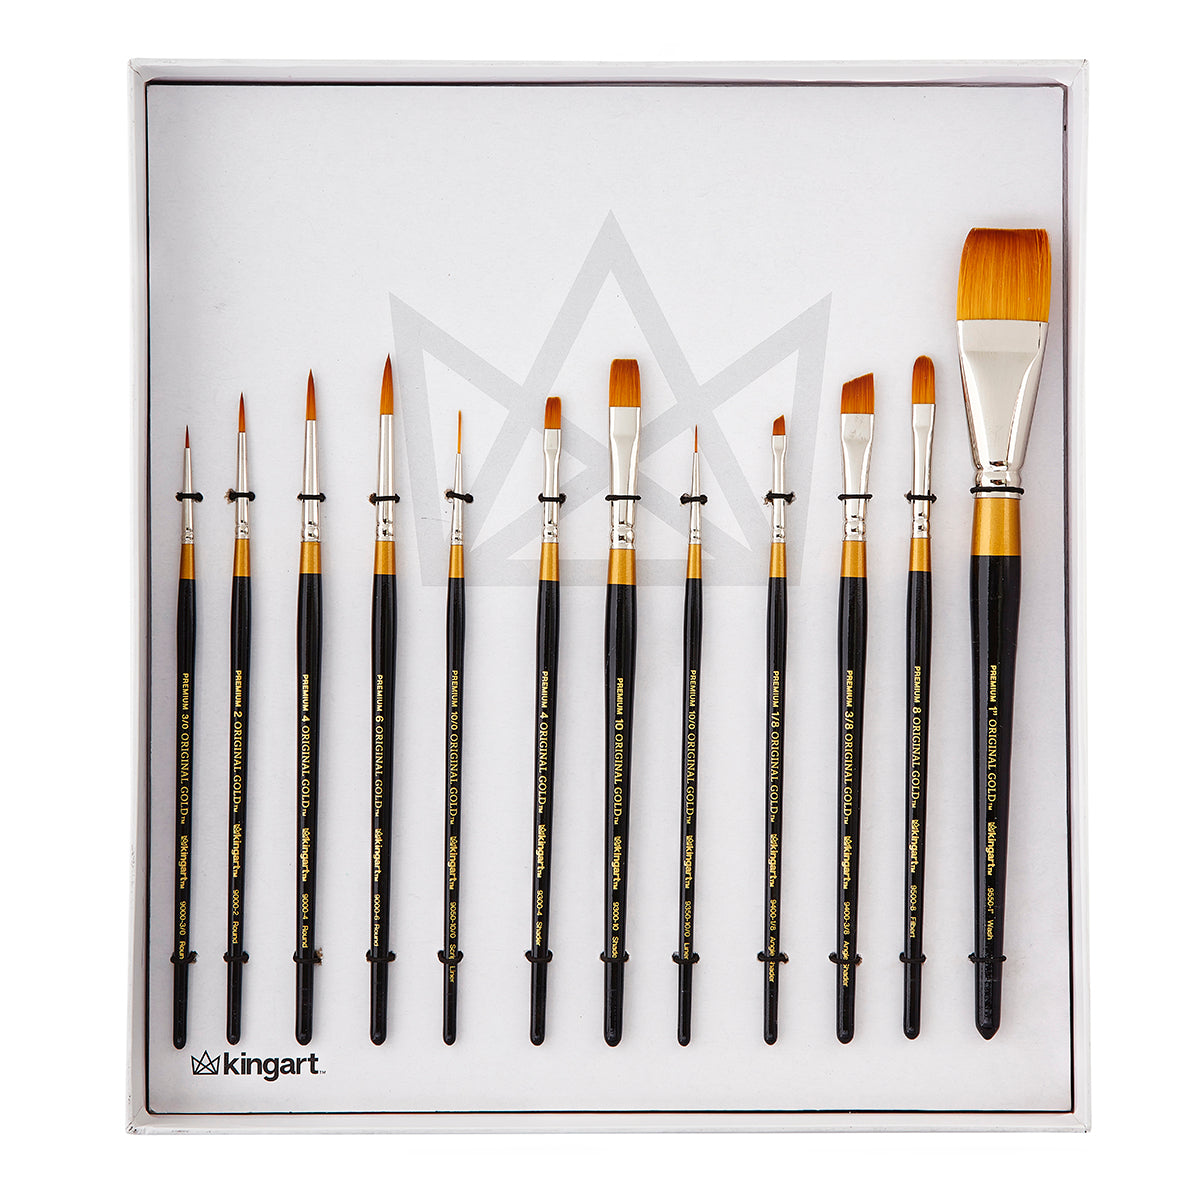 KINGART 1050A Premium 6 Pc. Flat Oval Mop Artist Brush Set, White  Super-Soft Natural Goat Hair, Short Handle, 6 Sizes for Oil, Acrylic and  Watercolor